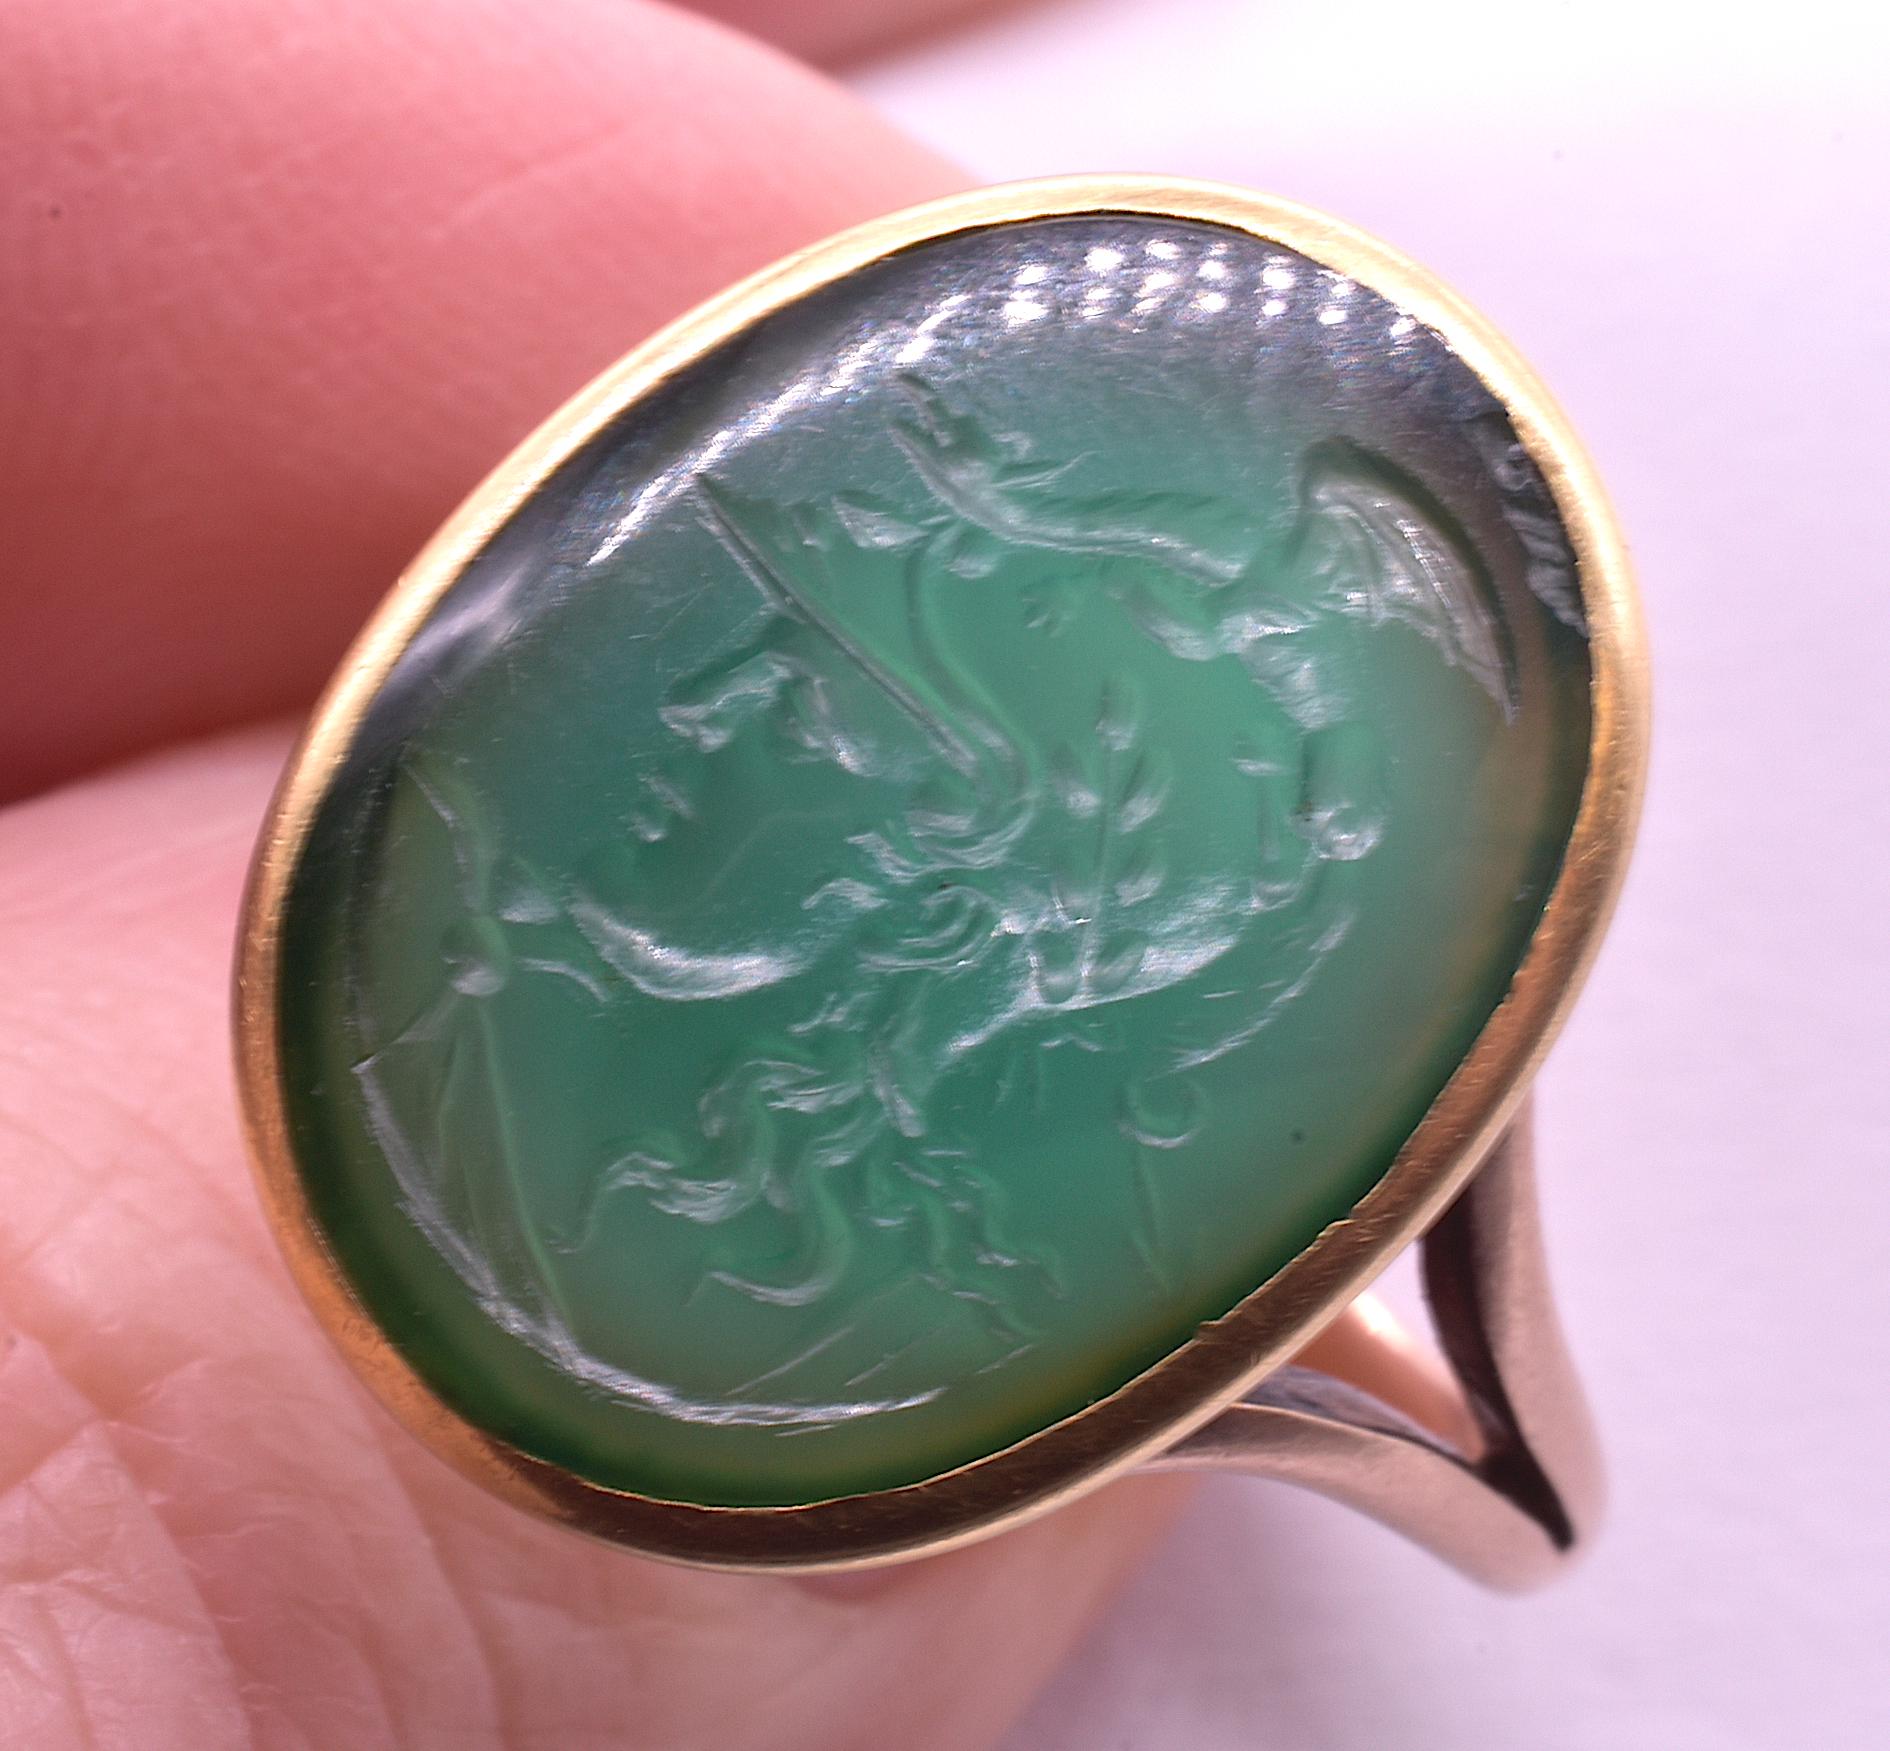 C1860 Agate Signet Ring of Bust of Helmeted Warrior, Probably Menelaus 1